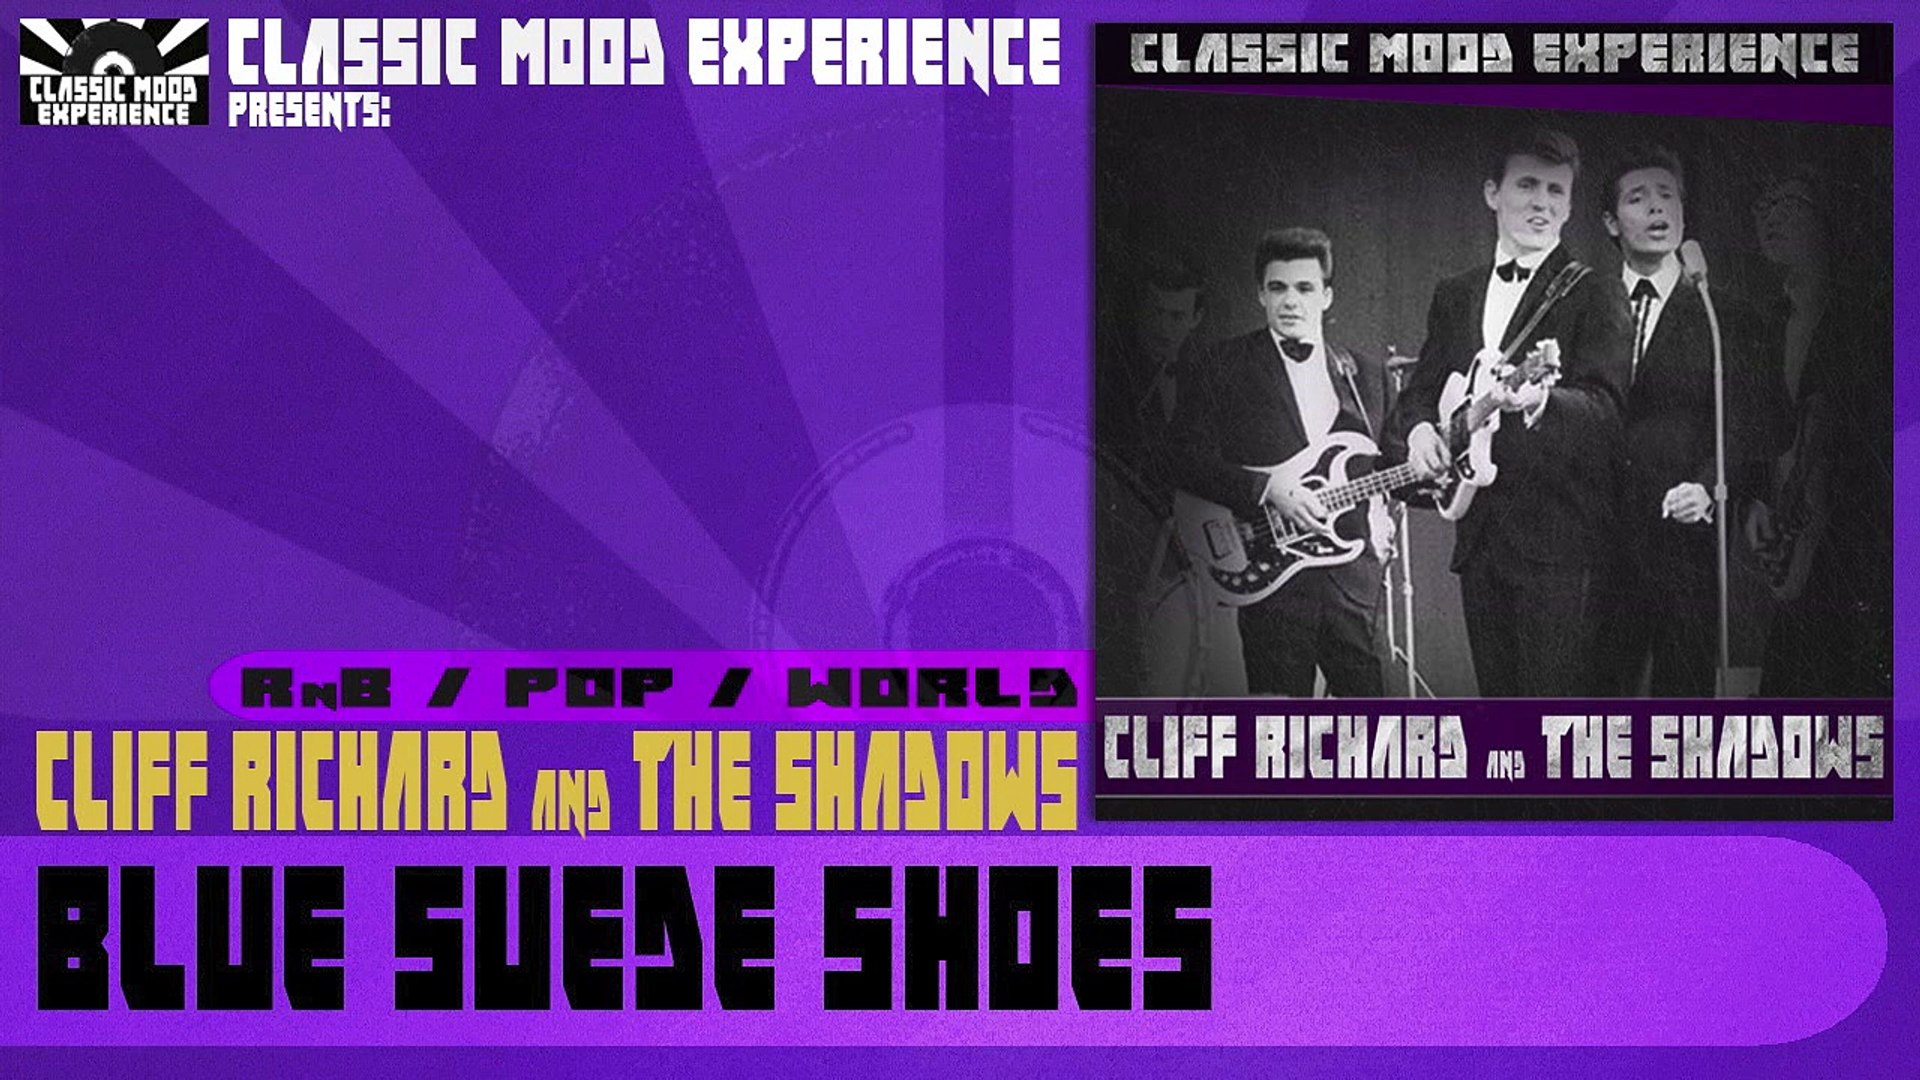 ⁣Cliff Richard & The Shadows - Blue Suede Shoes (1959)